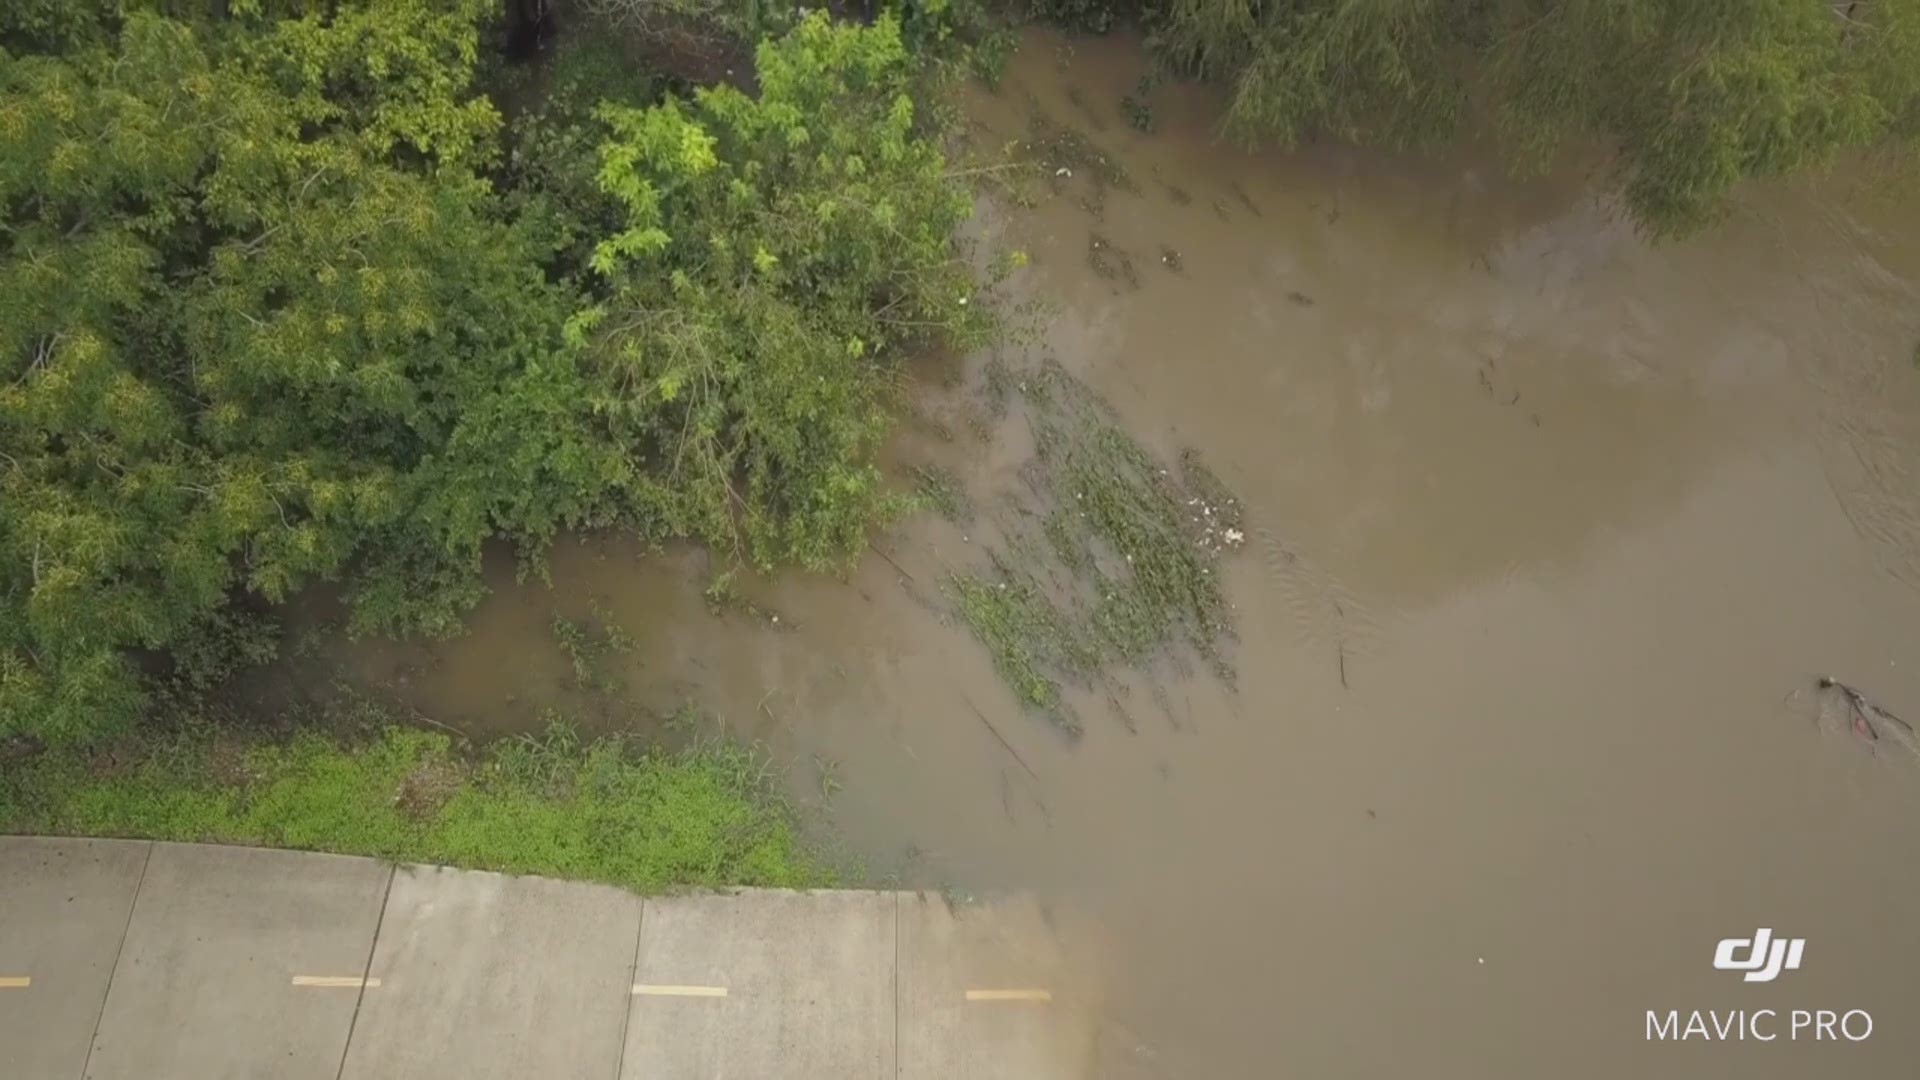 Drone pilot Ernie Shown recorded this video on the Salado Creek Hike and Bike Trail Saturday afternoon.